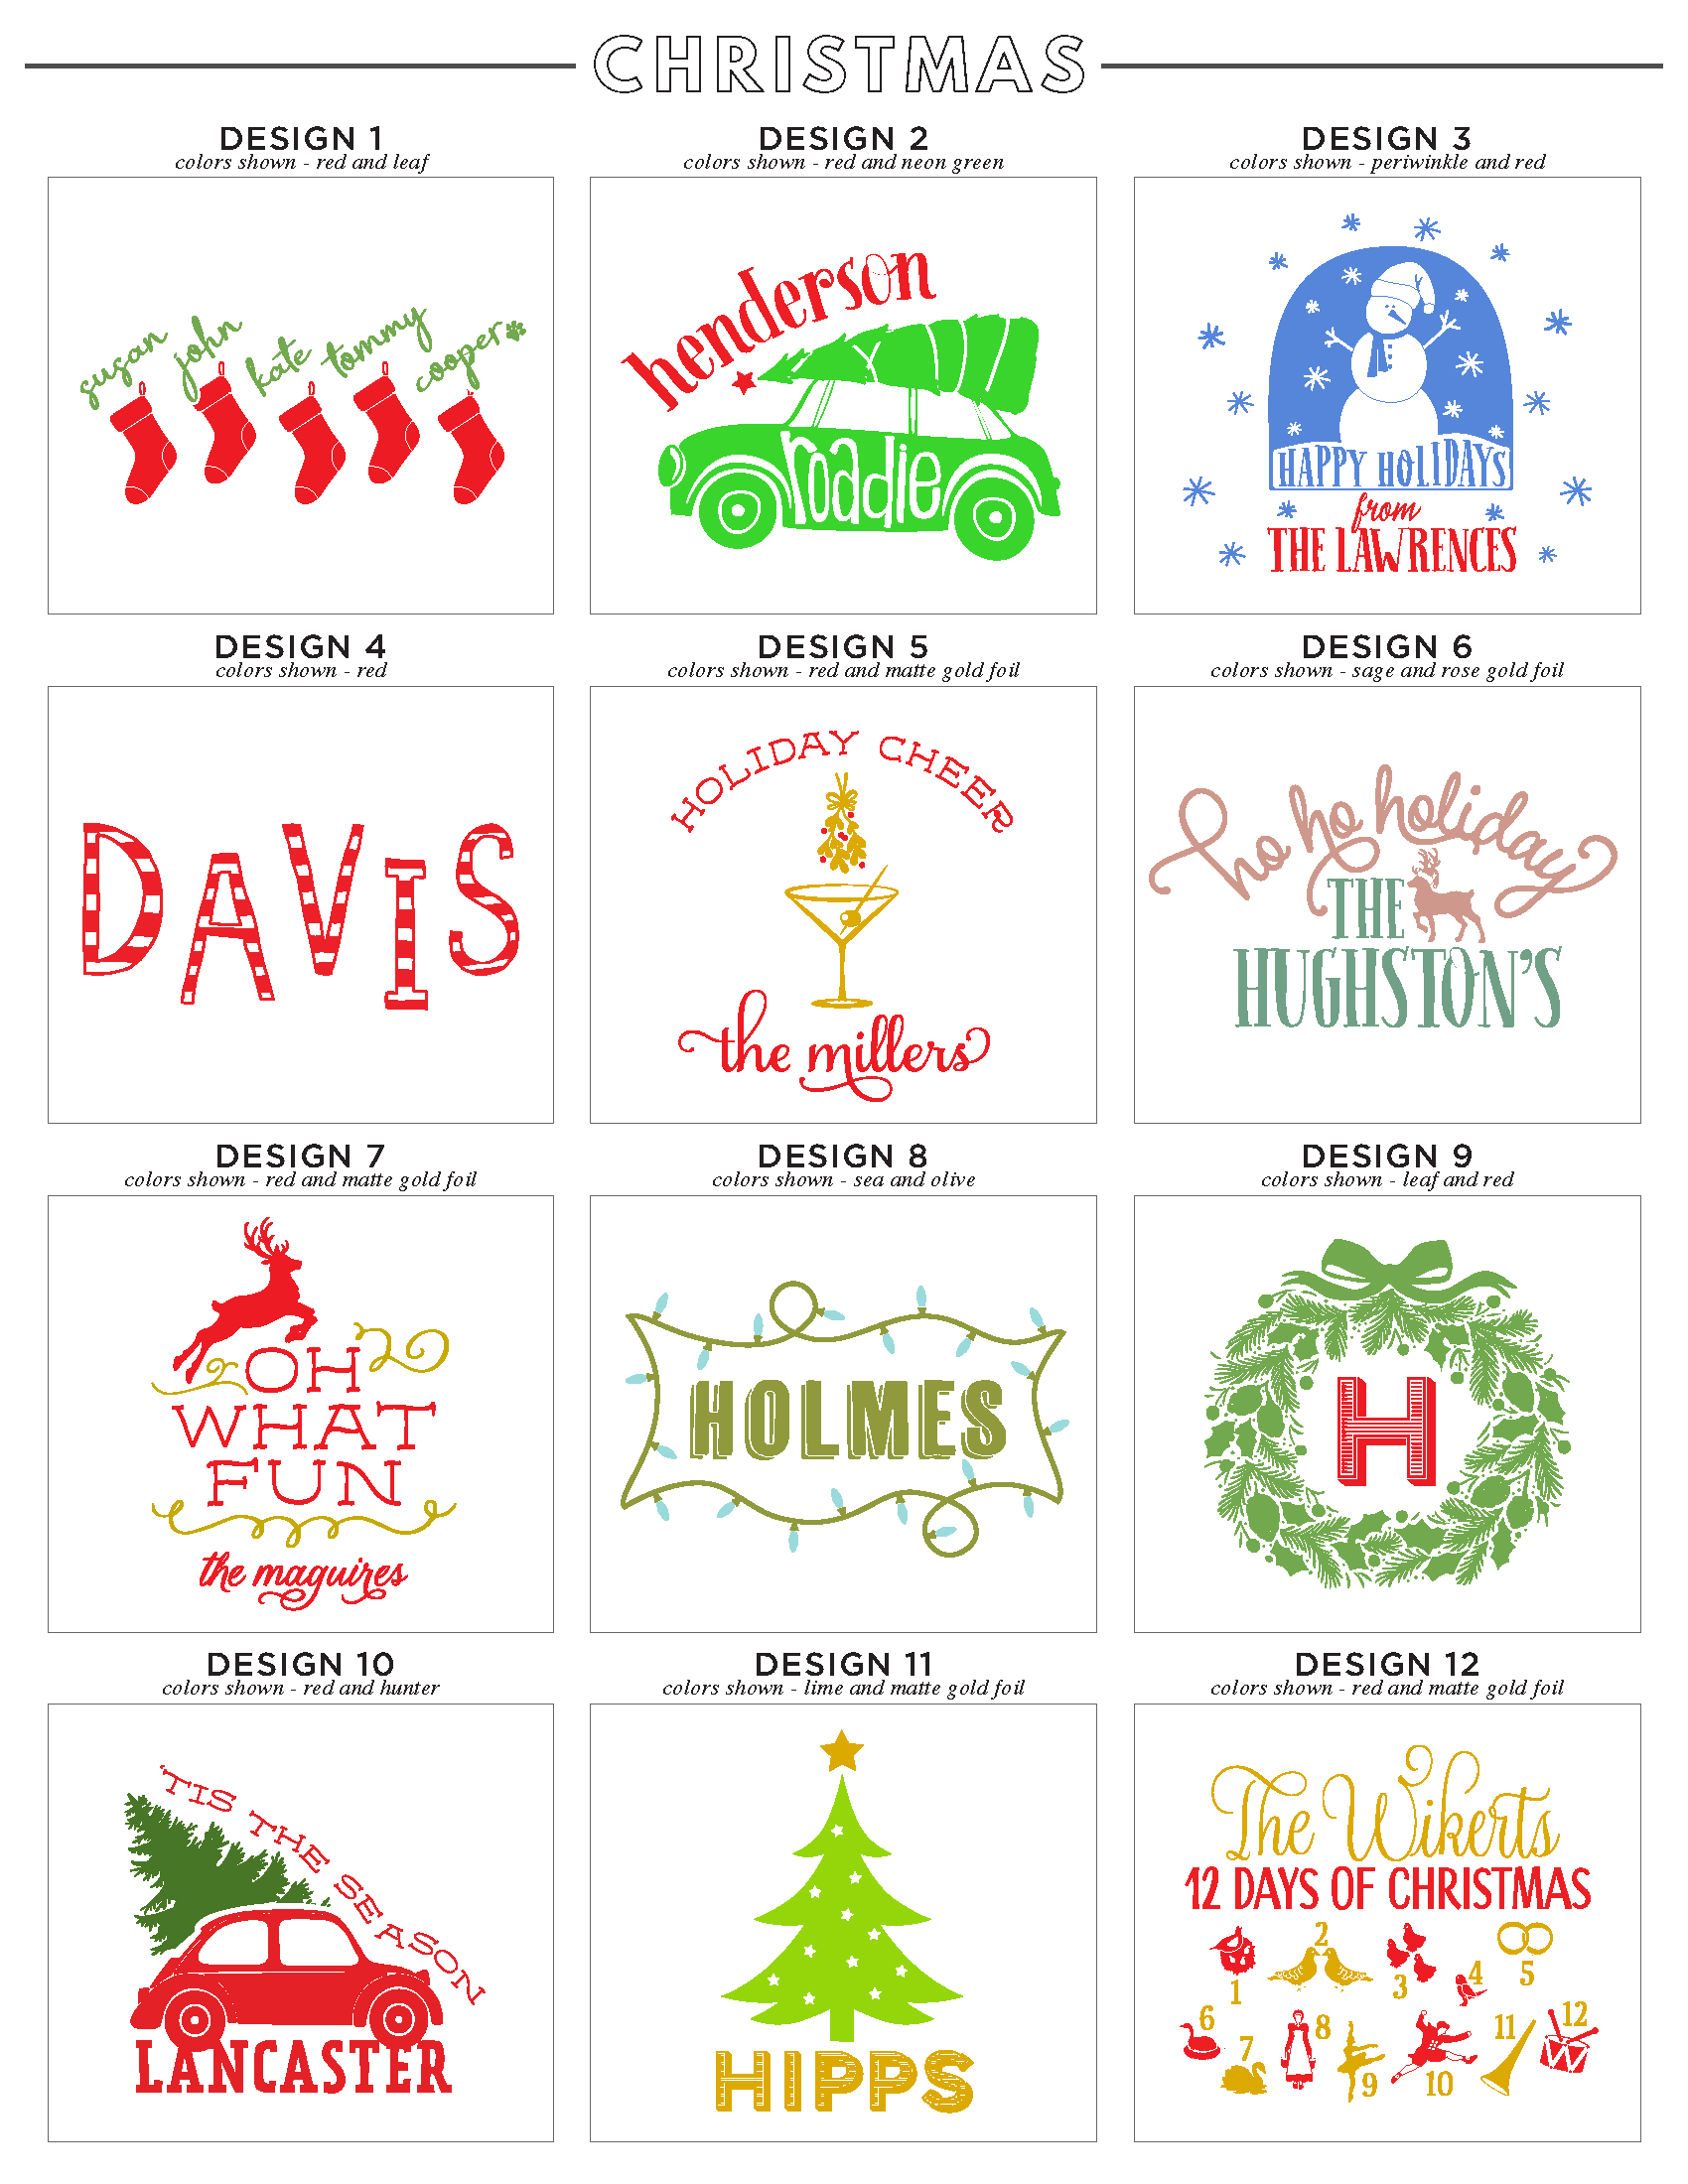 https://cdn.shopify.com/s/files/1/2359/1519/files/DESIGN2_CHRISTMAS_FINAL2_outlined.png